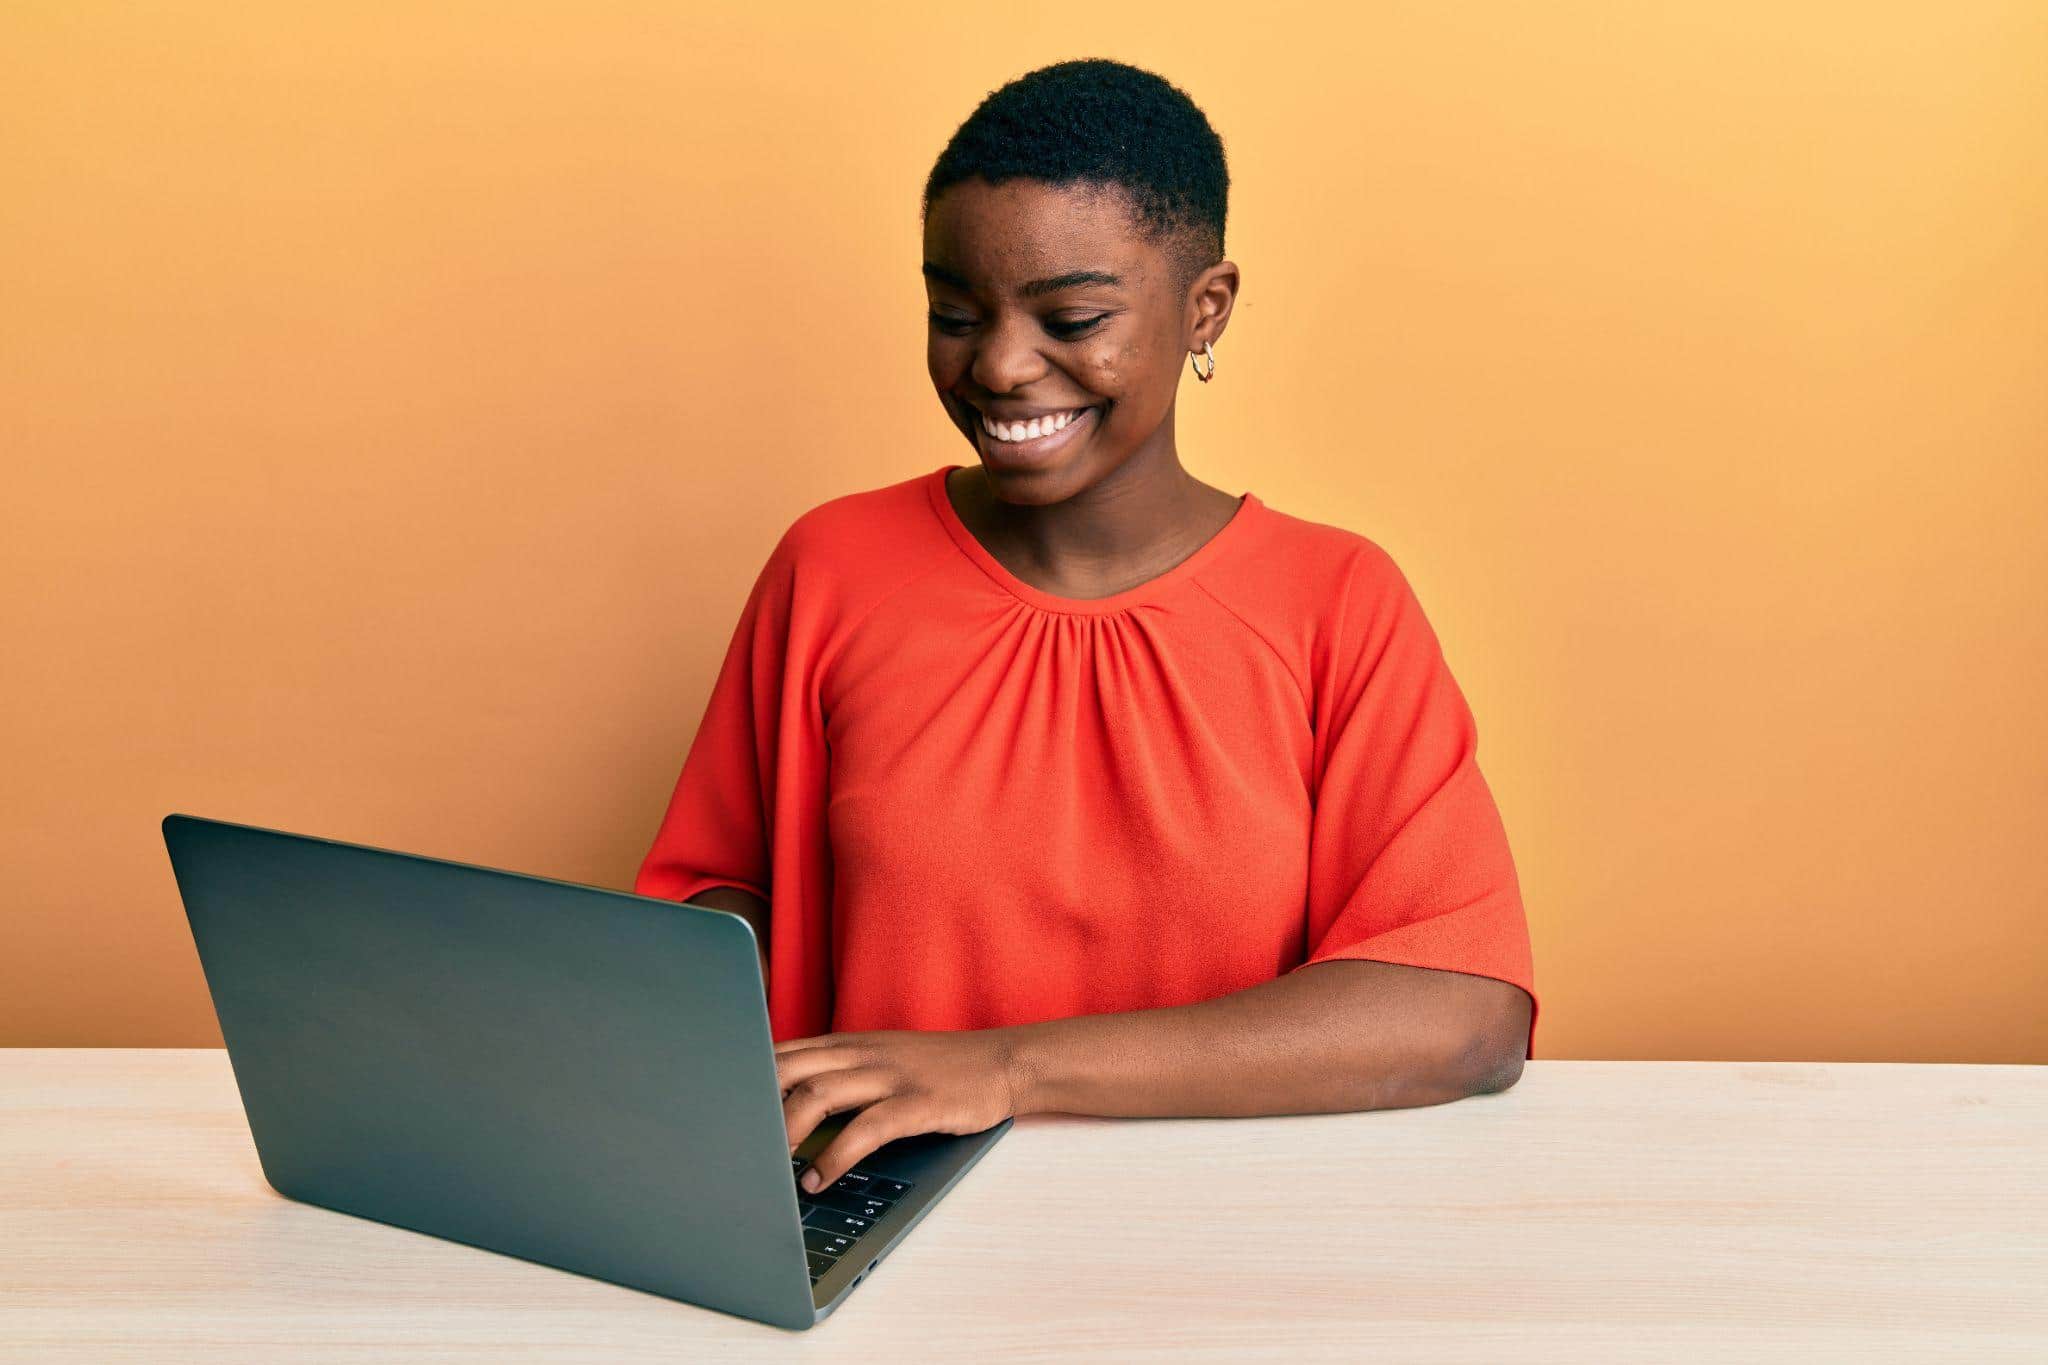 young woman working on a laptop